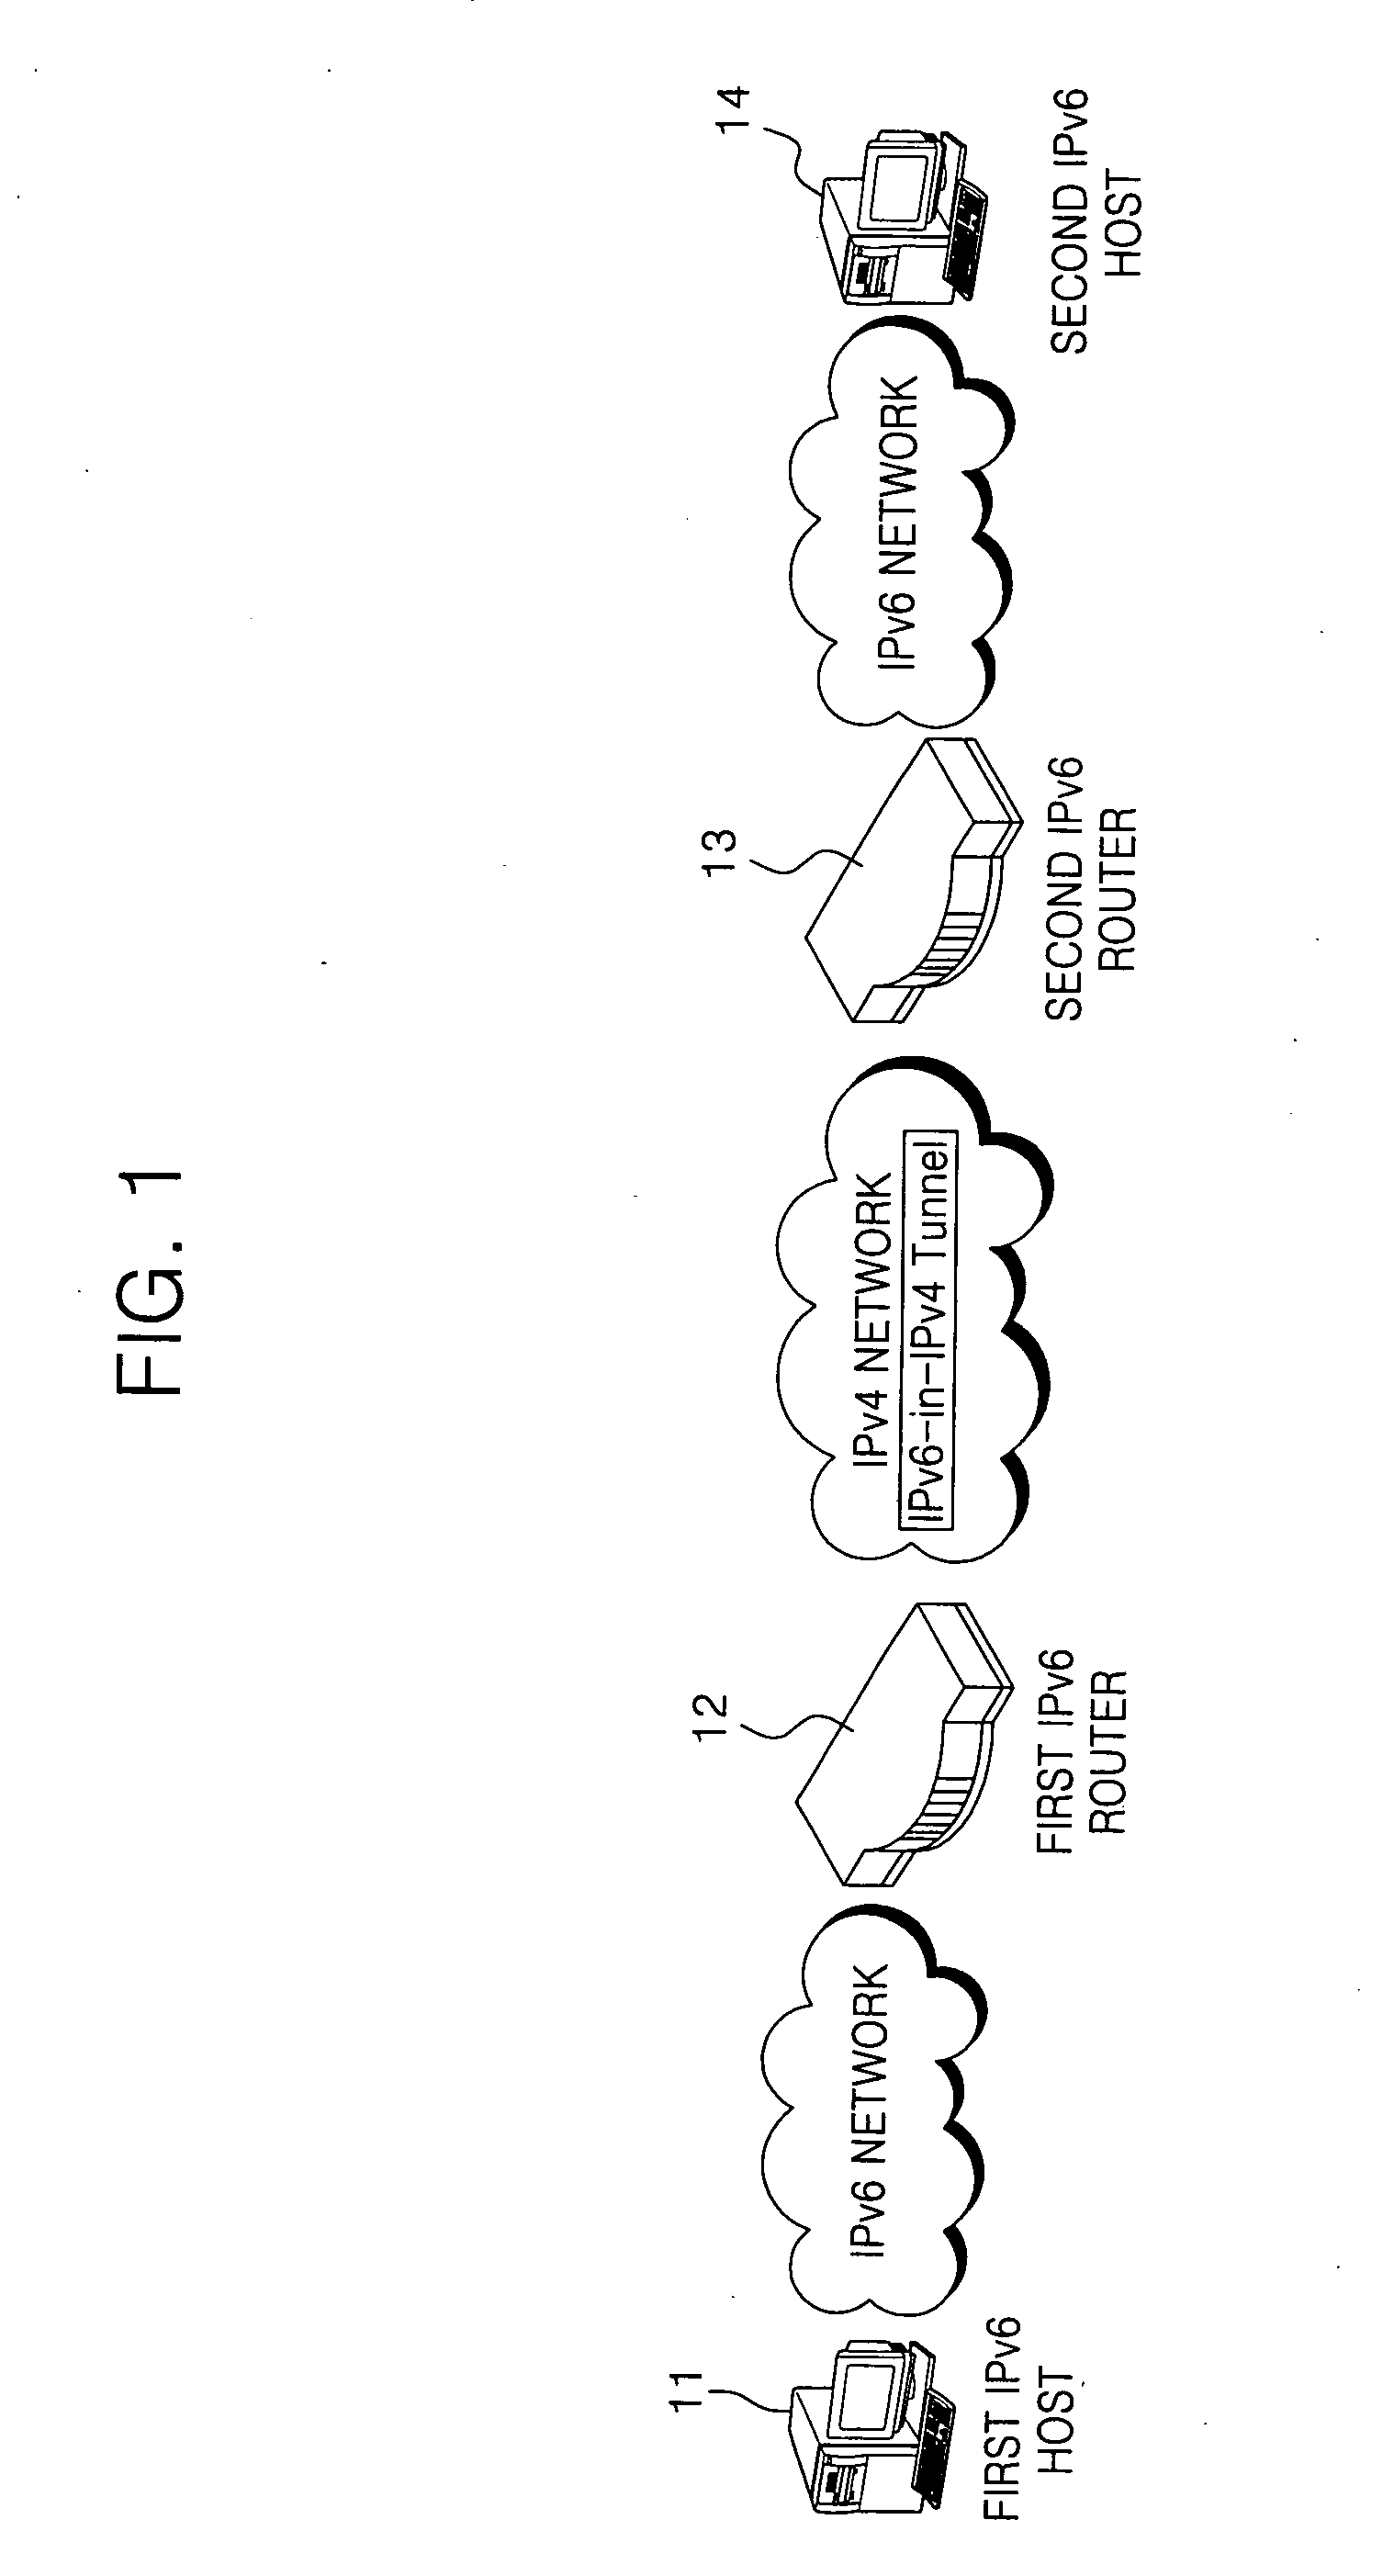 ISATAP router for tunneling packets and method thereof